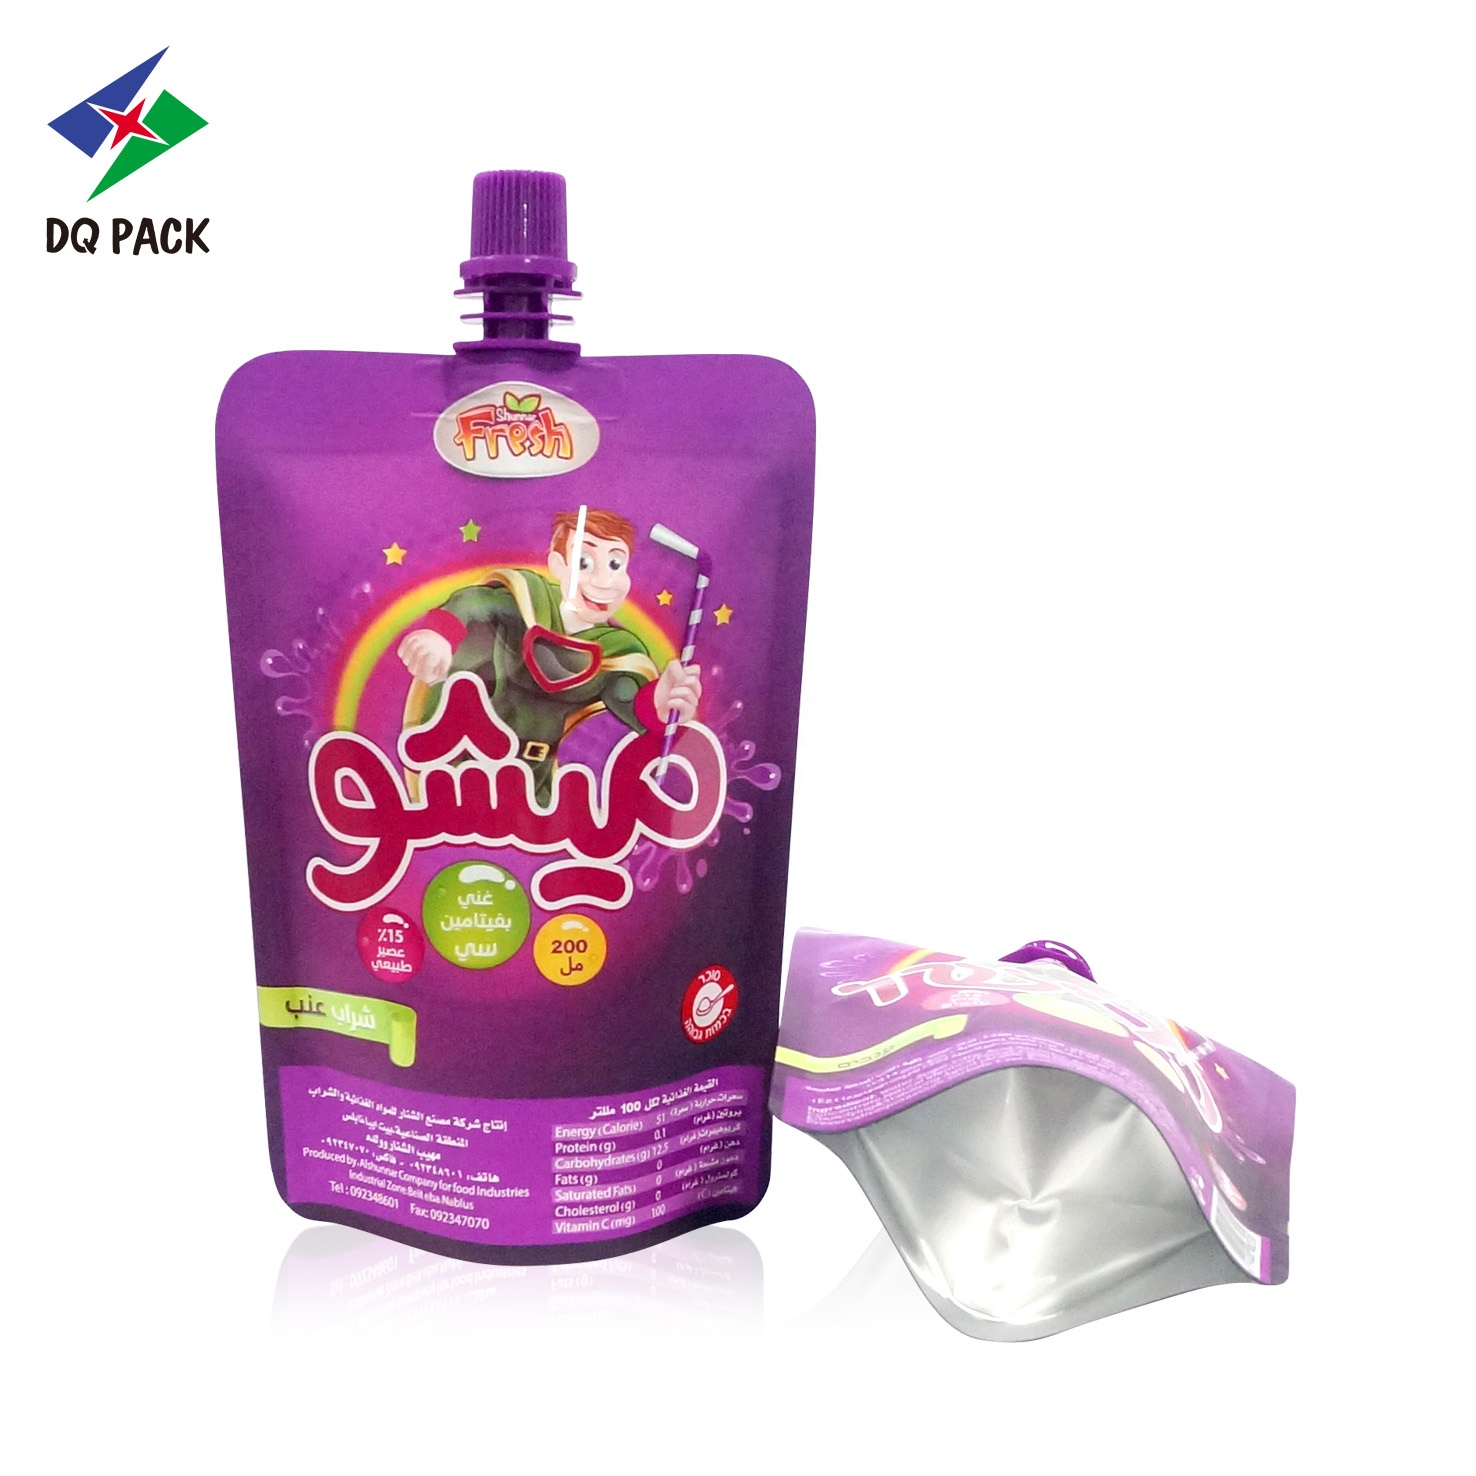 DQ PACK eco friendly beverage Food Spout Pouch With Anti-chop Lid- Juice Baby Plastic Bag packaging